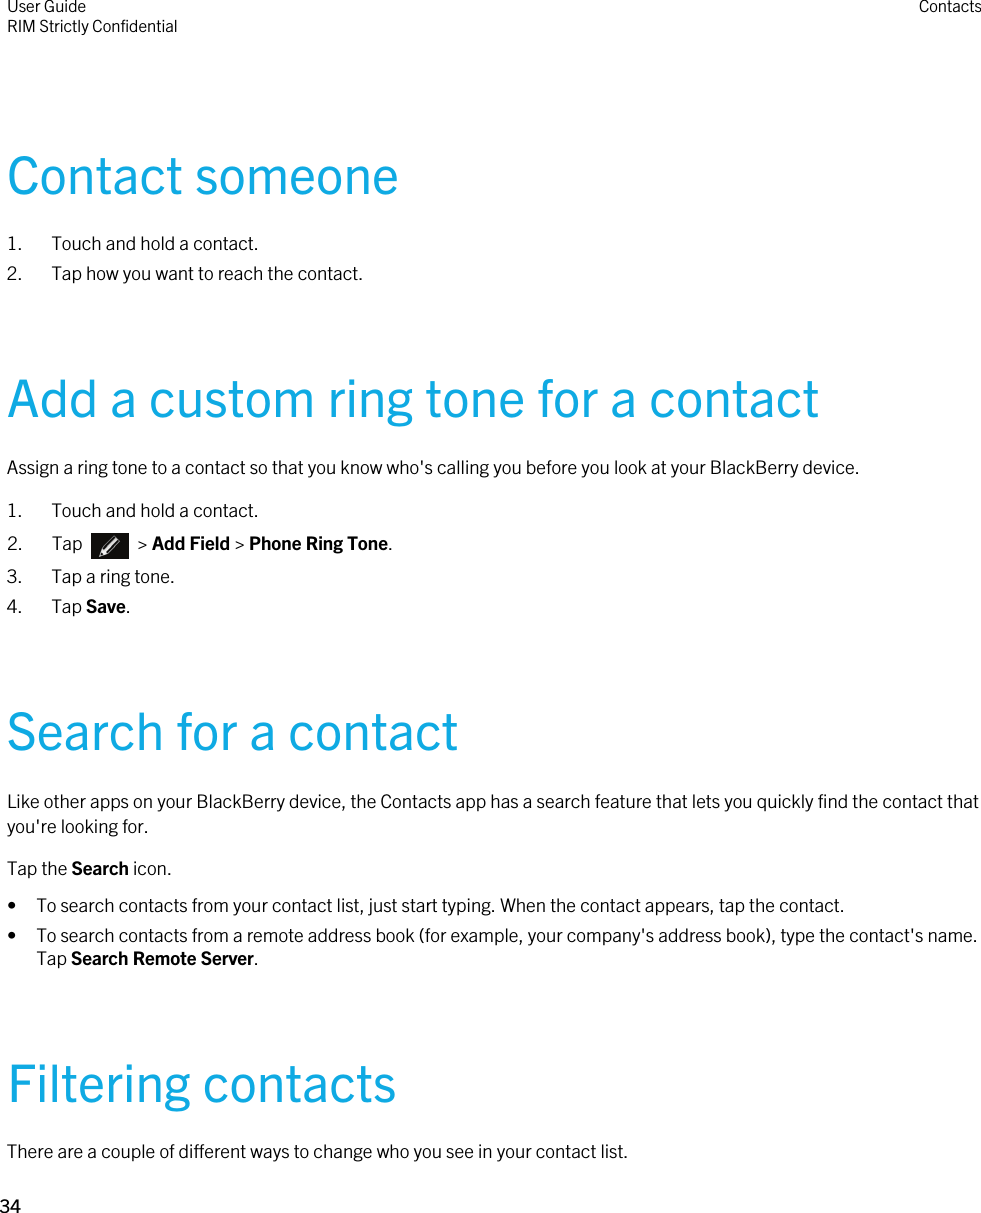 Contact someone1. Touch and hold a contact.2. Tap how you want to reach the contact.Add a custom ring tone for a contactAssign a ring tone to a contact so that you know who&apos;s calling you before you look at your BlackBerry device.1. Touch and hold a contact.2.  Tap    &gt; Add Field &gt; Phone Ring Tone.3. Tap a ring tone.4. Tap Save.Search for a contactLike other apps on your BlackBerry device, the Contacts app has a search feature that lets you quickly find the contact that you&apos;re looking for.Tap the Search icon.• To search contacts from your contact list, just start typing. When the contact appears, tap the contact.• To search contacts from a remote address book (for example, your company&apos;s address book), type the contact&apos;s name. Tap Search Remote Server.Filtering contactsThere are a couple of different ways to change who you see in your contact list.User GuideRIM Strictly Confidential Contacts34 